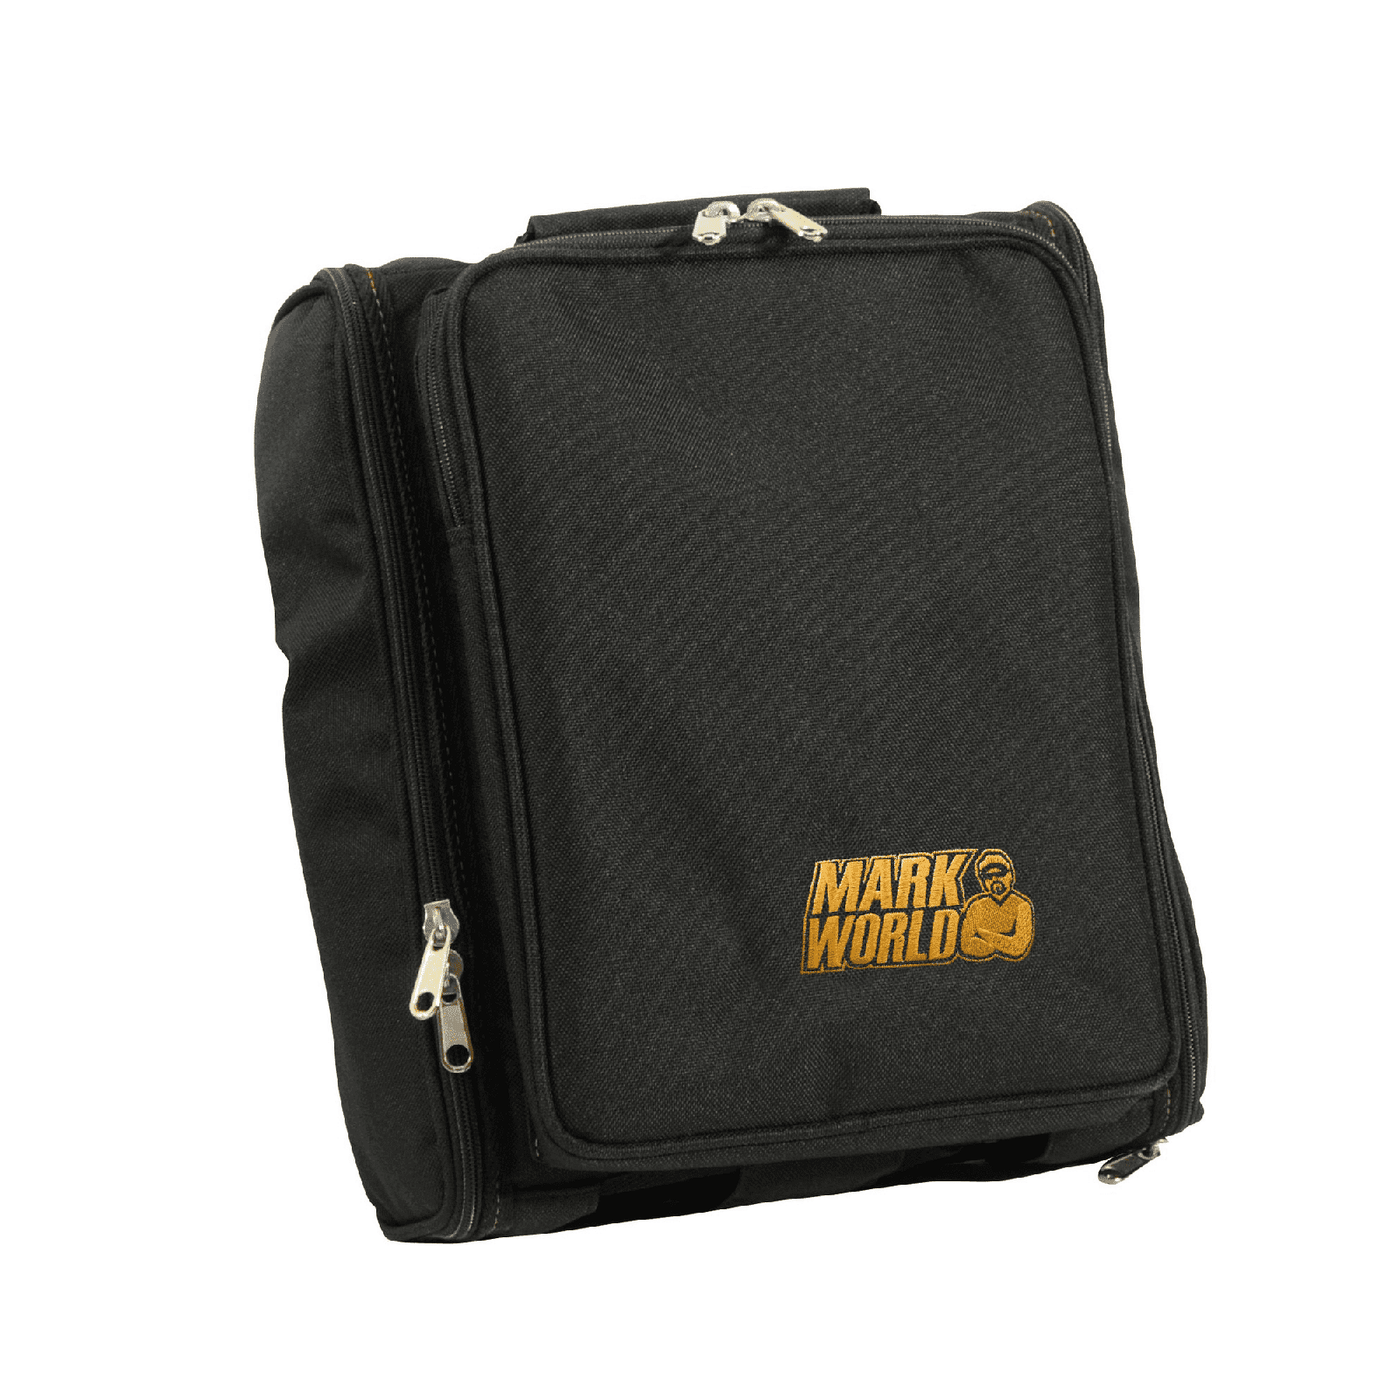 Funda Markbass Little Mark / Marcus - This premium-quality amp bag allows you to transport your Little Mark or Little Marcus head in a knapsack (along with cables, tuner, charts, etc.) and then keep the amp in the bag during use. Ultra-handy for in town g